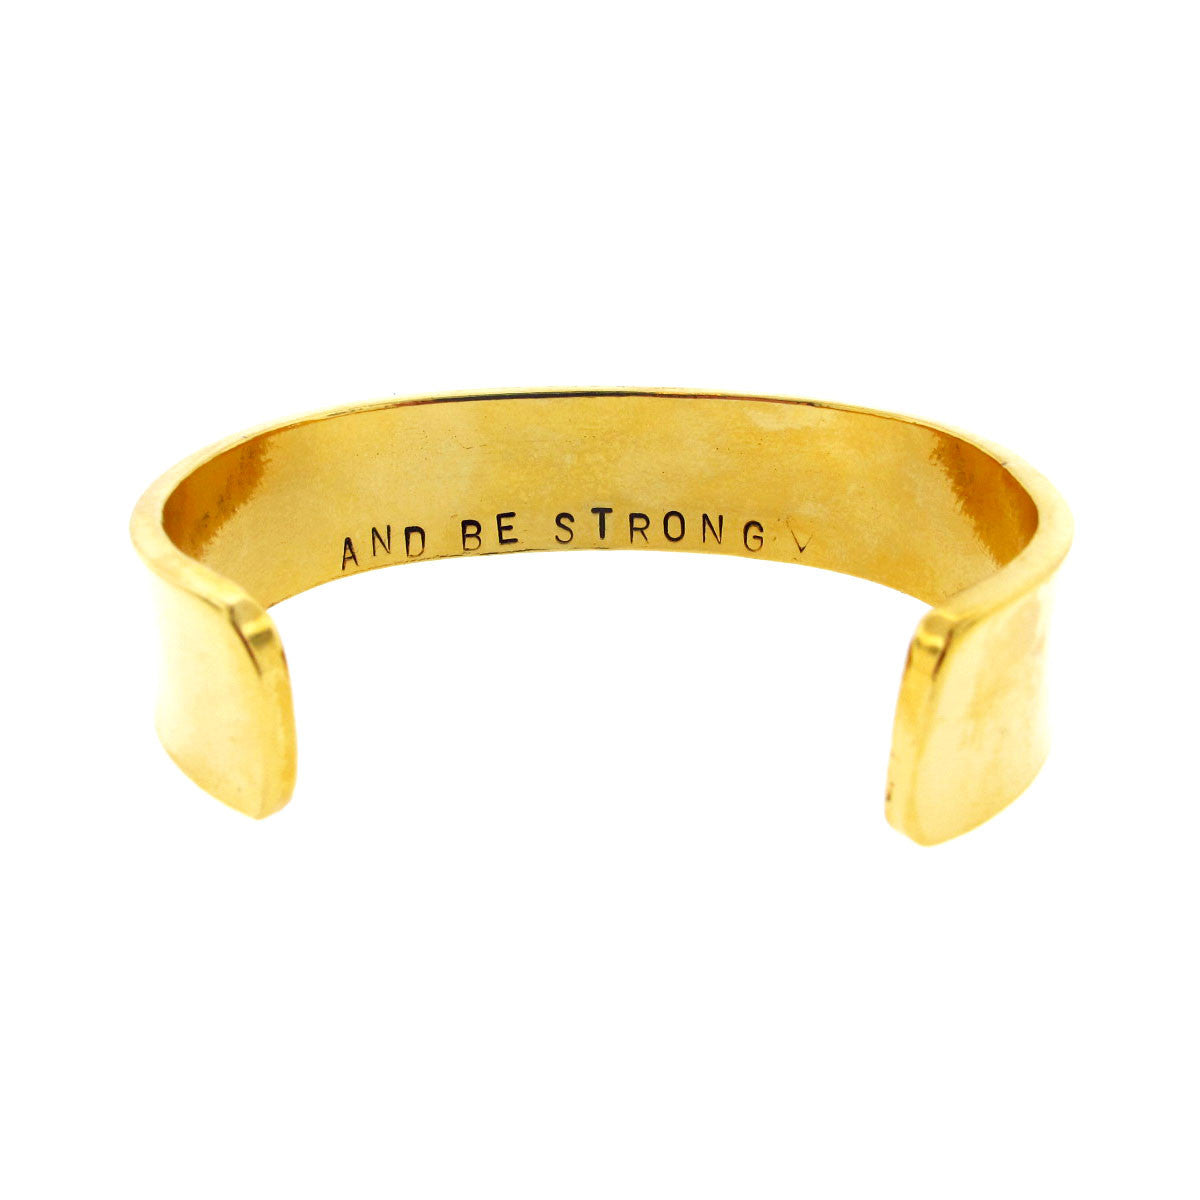 Let Go/And Be Strong Double-Sided Hand Stamped Gold Cuff